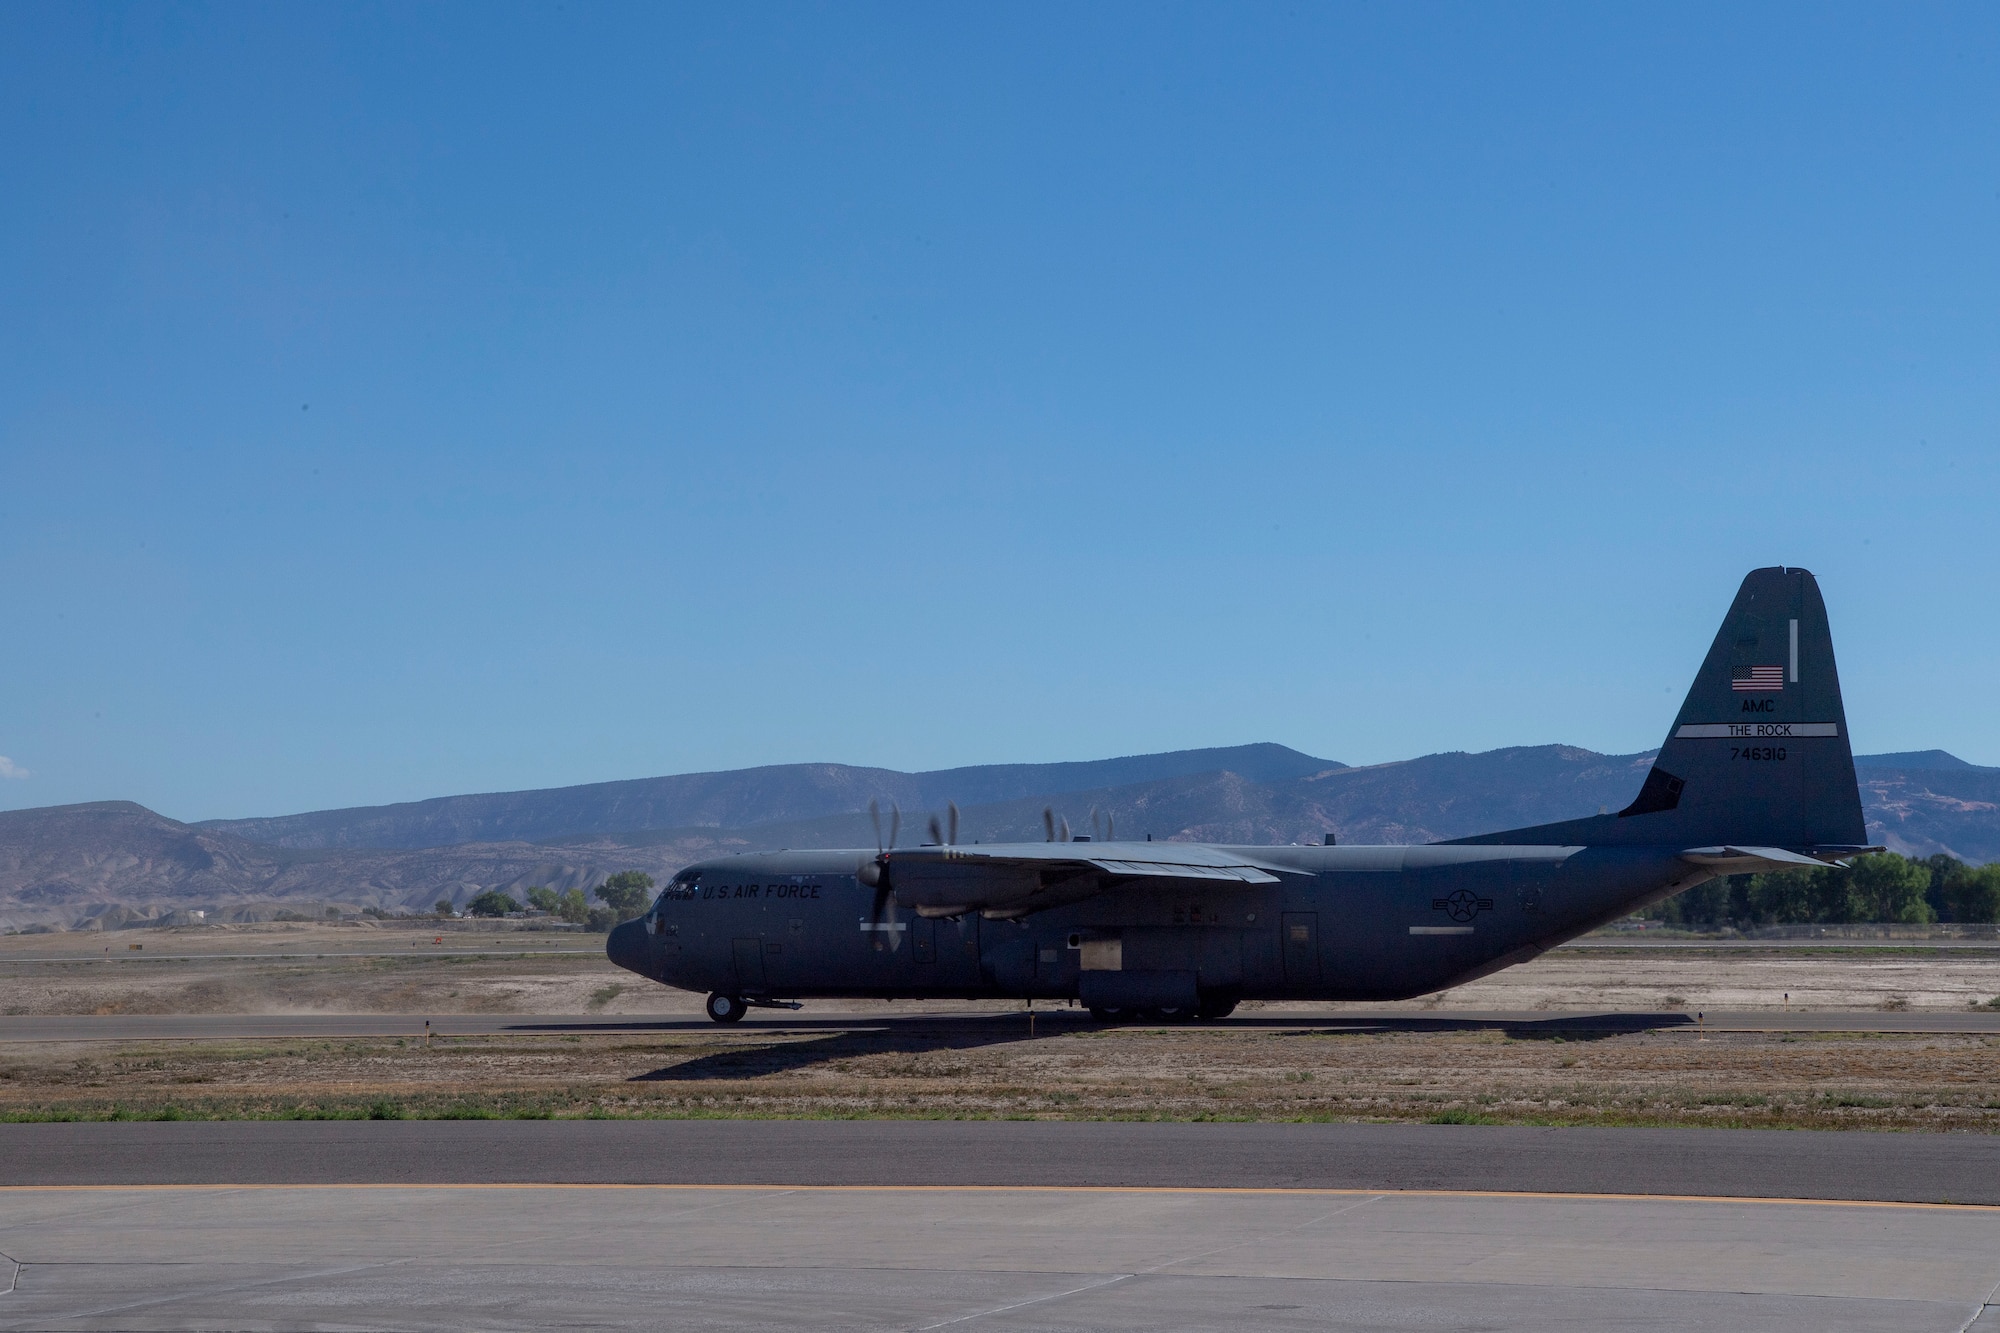 A C-130J Super Hercules prepares for takeoff during pre-deployment training at Montrose Regional Airport, Colorado, July 27, 2020. This training is part of the 4/12 deployment initiative, which was developed in 2019 between airlift squadrons from Dyess Air Force Base, Texas and Little Rock AFB, allowing each squadron a full year of dwell time followed by a four-month rotation to their respective area of responsibility. (U.S. Air Force photo by Airman 1st Class Aaron Irvin)